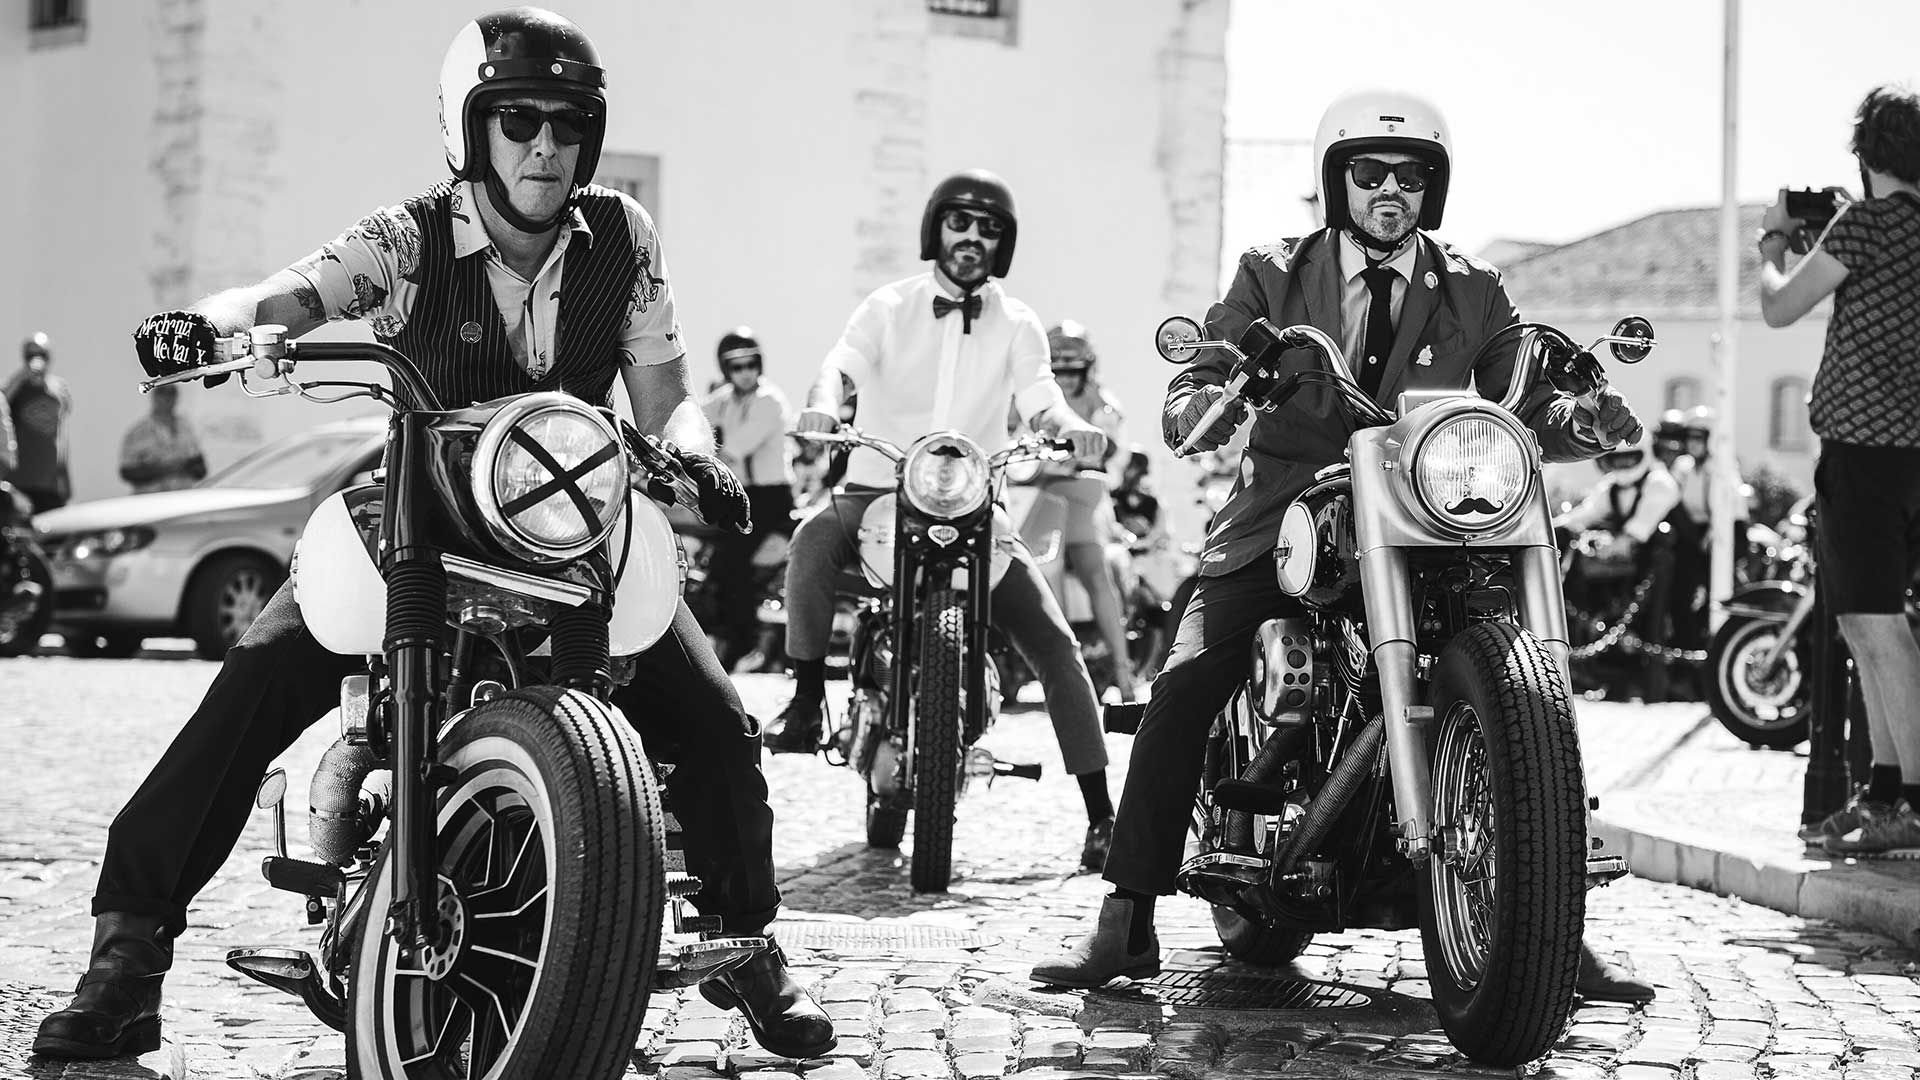 A convoy of motorcyclists during a DGR ride event.